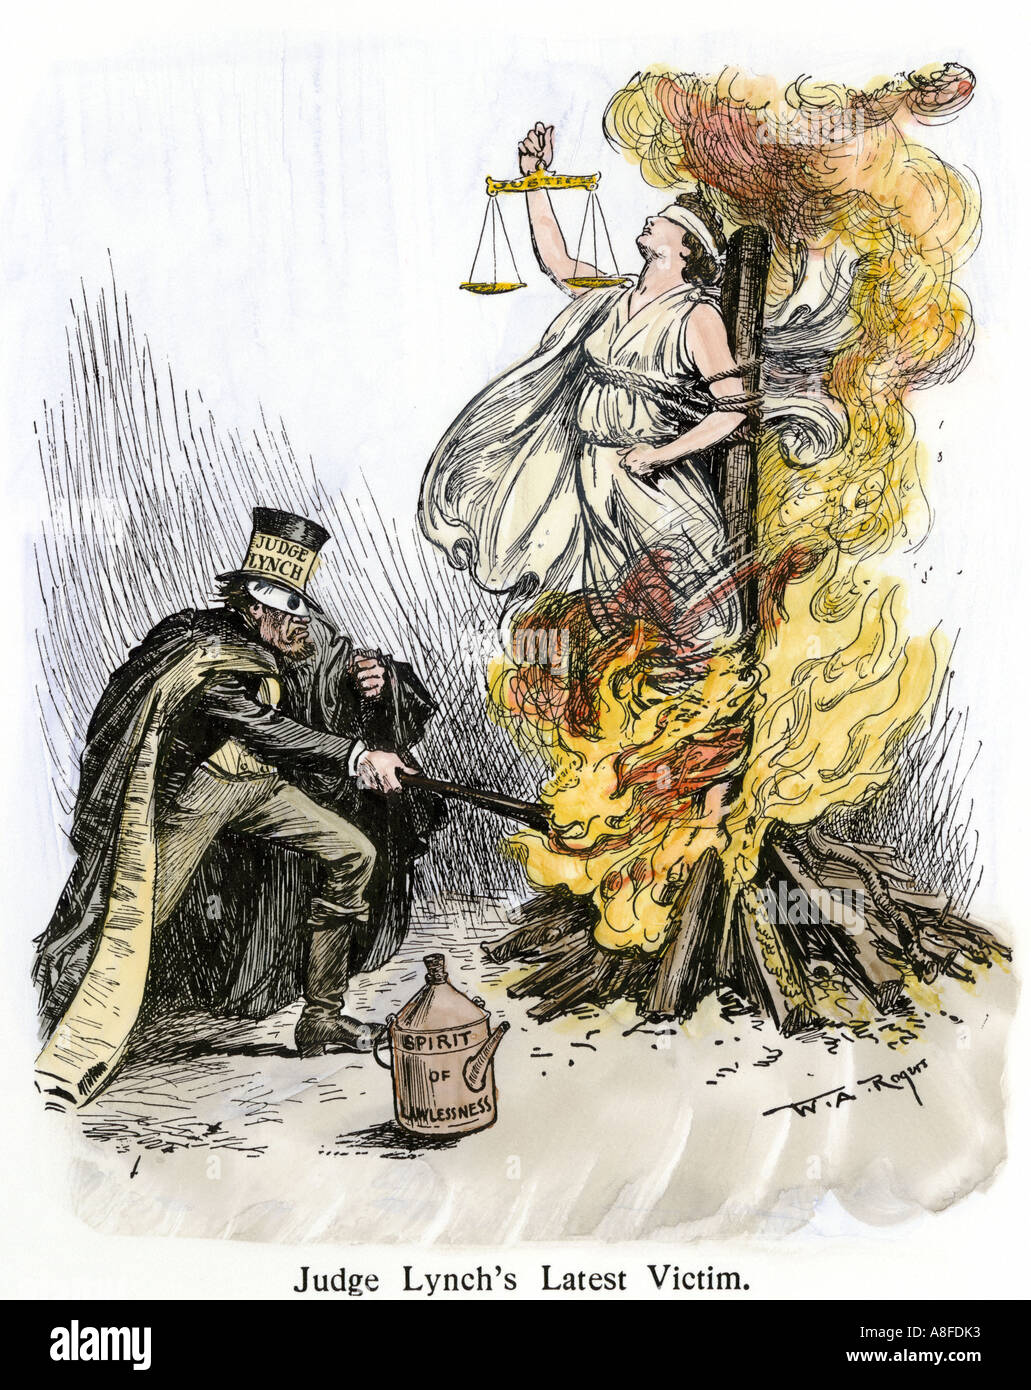 Judge Lynch burning Justice as the latest victim of lawlessness 1901 cartoon. Hand-colored woodcut of A W. A. Rogers cartoon Stock Photo